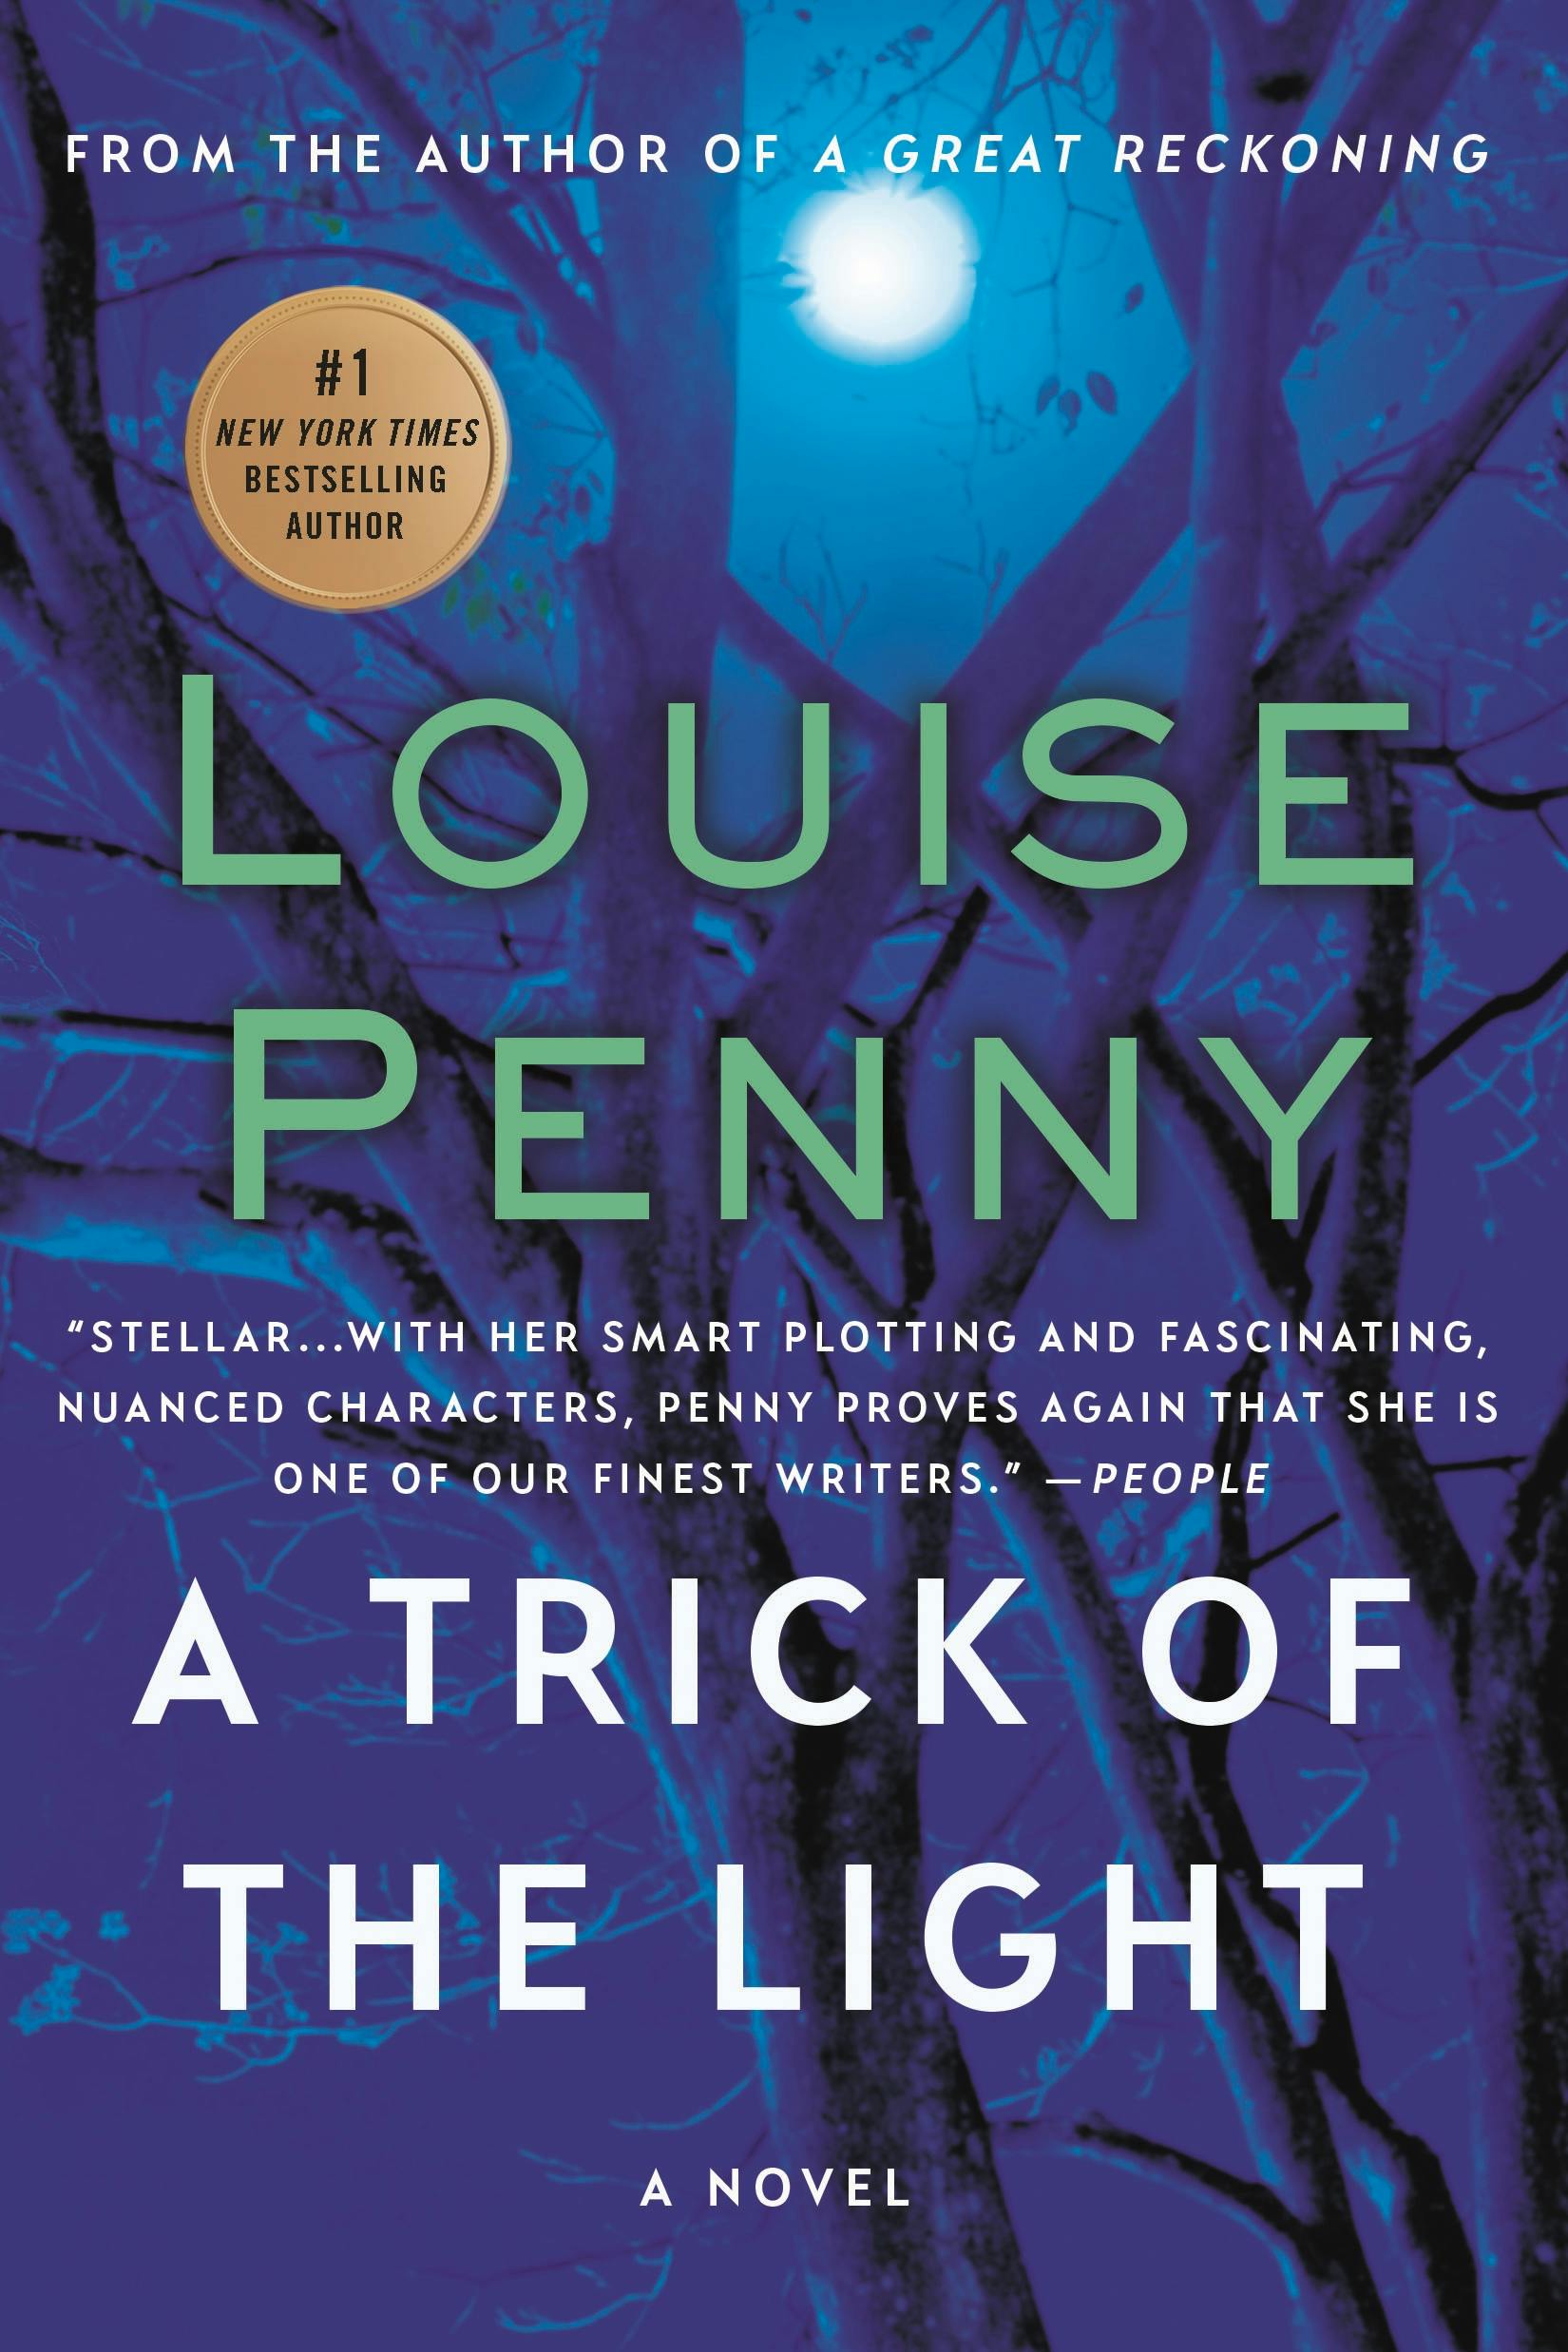 20 fascinating facts about Louise Penny